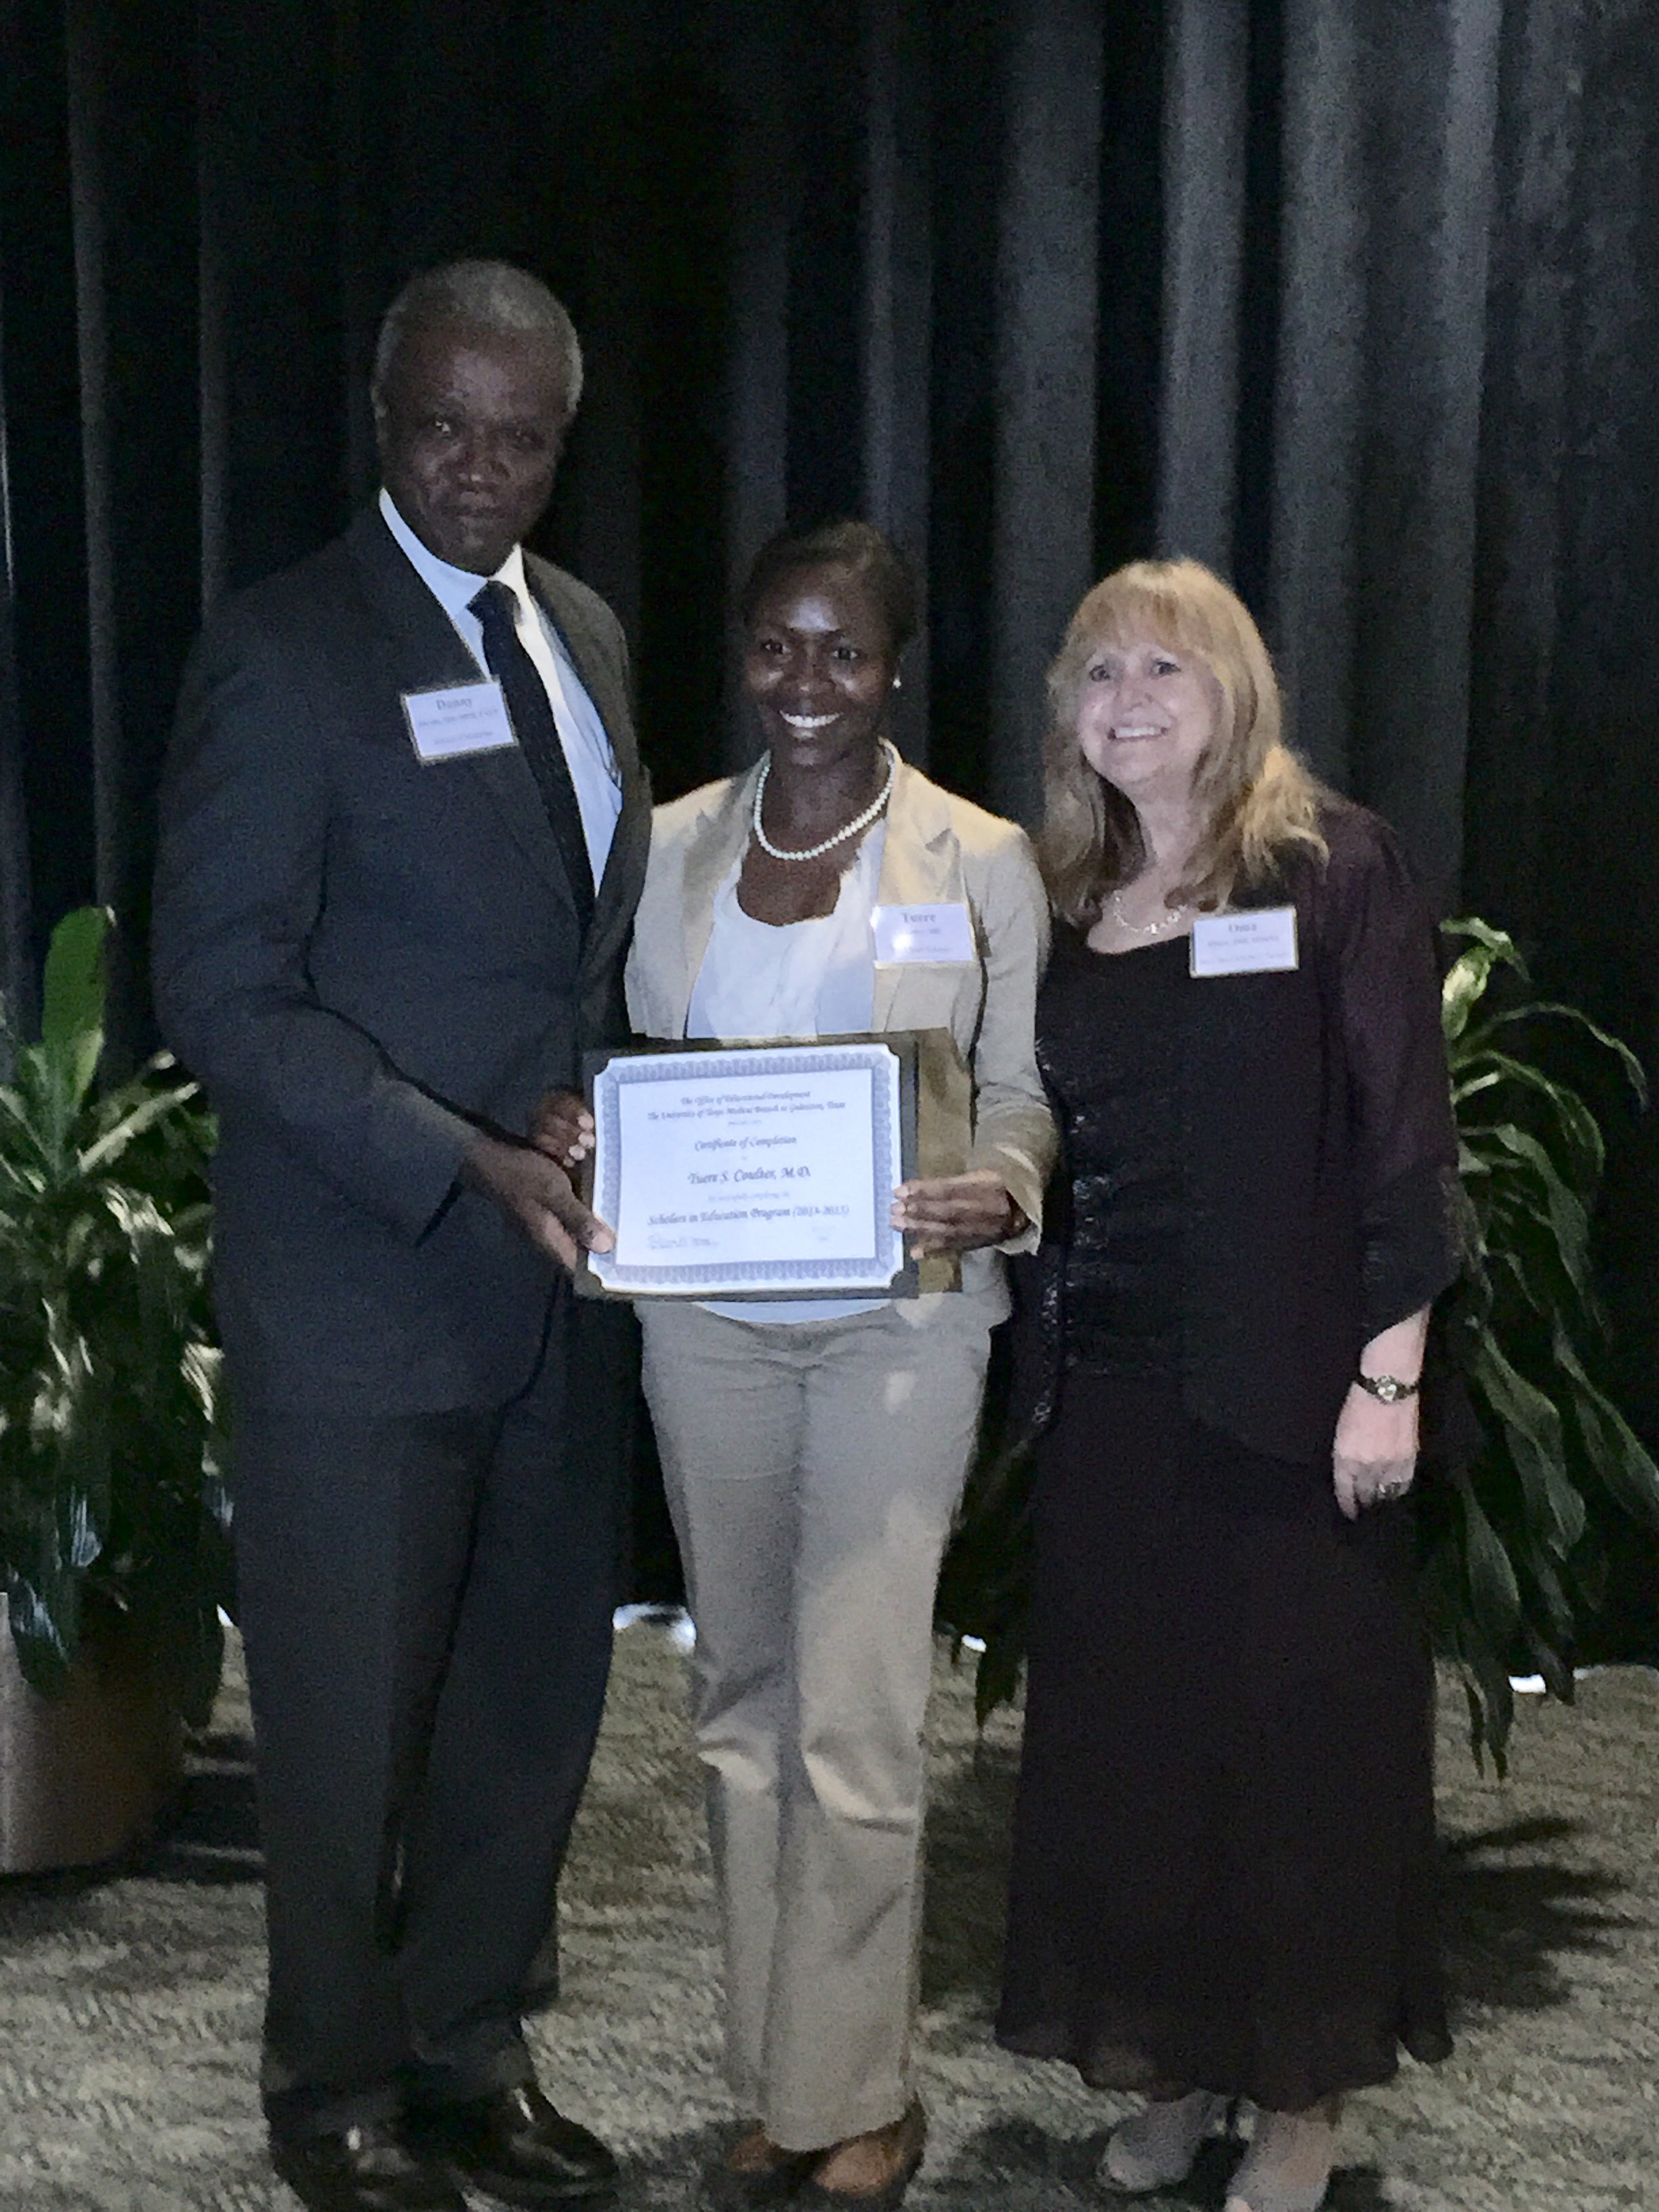 Tuere Coulter, MD (center) receiving her certificate of completion for the UTMB Health Scholars in Education Program